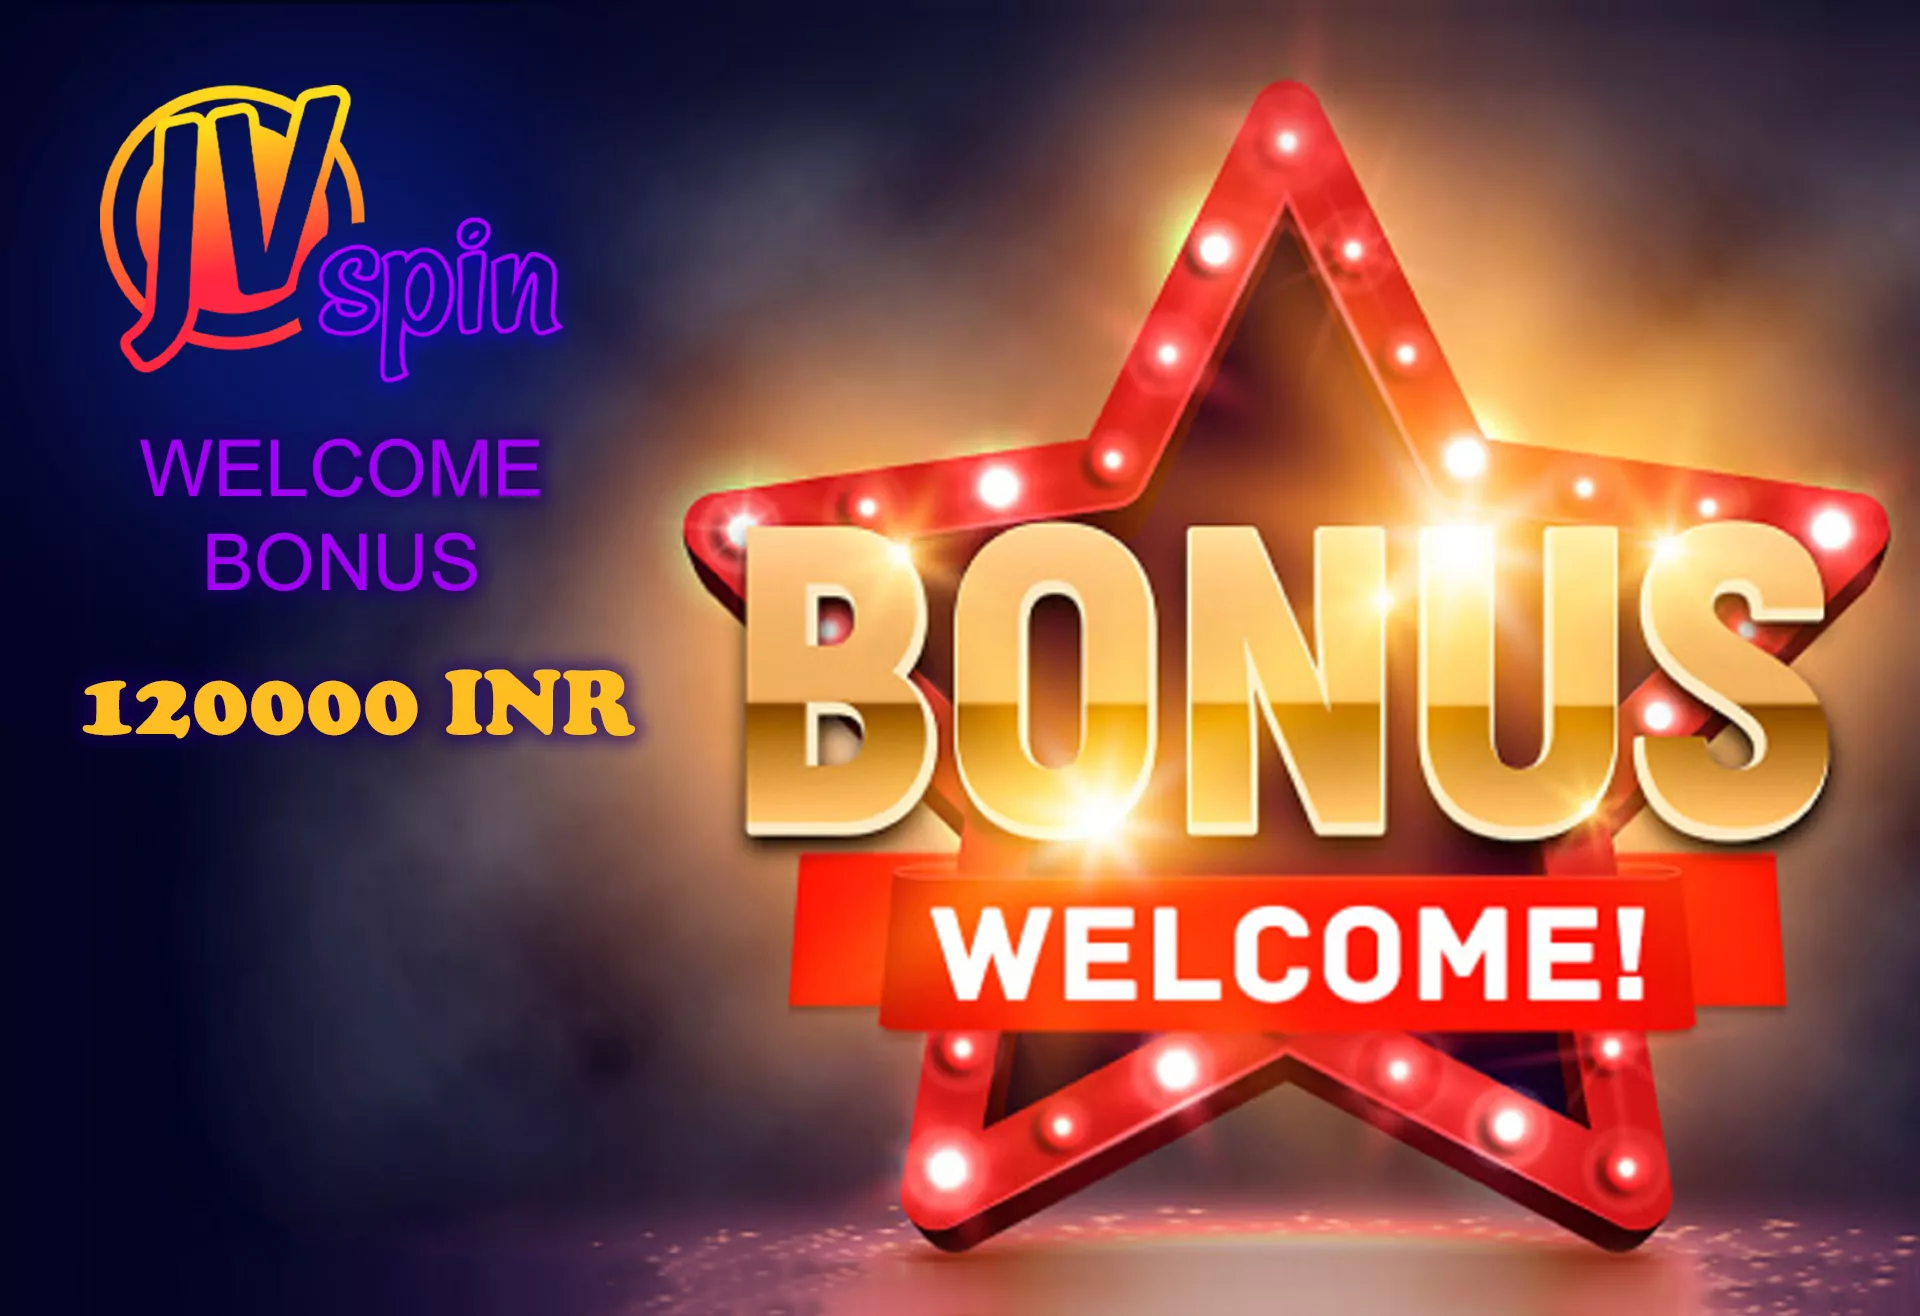 After you top up your account you can get a bonus of up to 120000 INR.